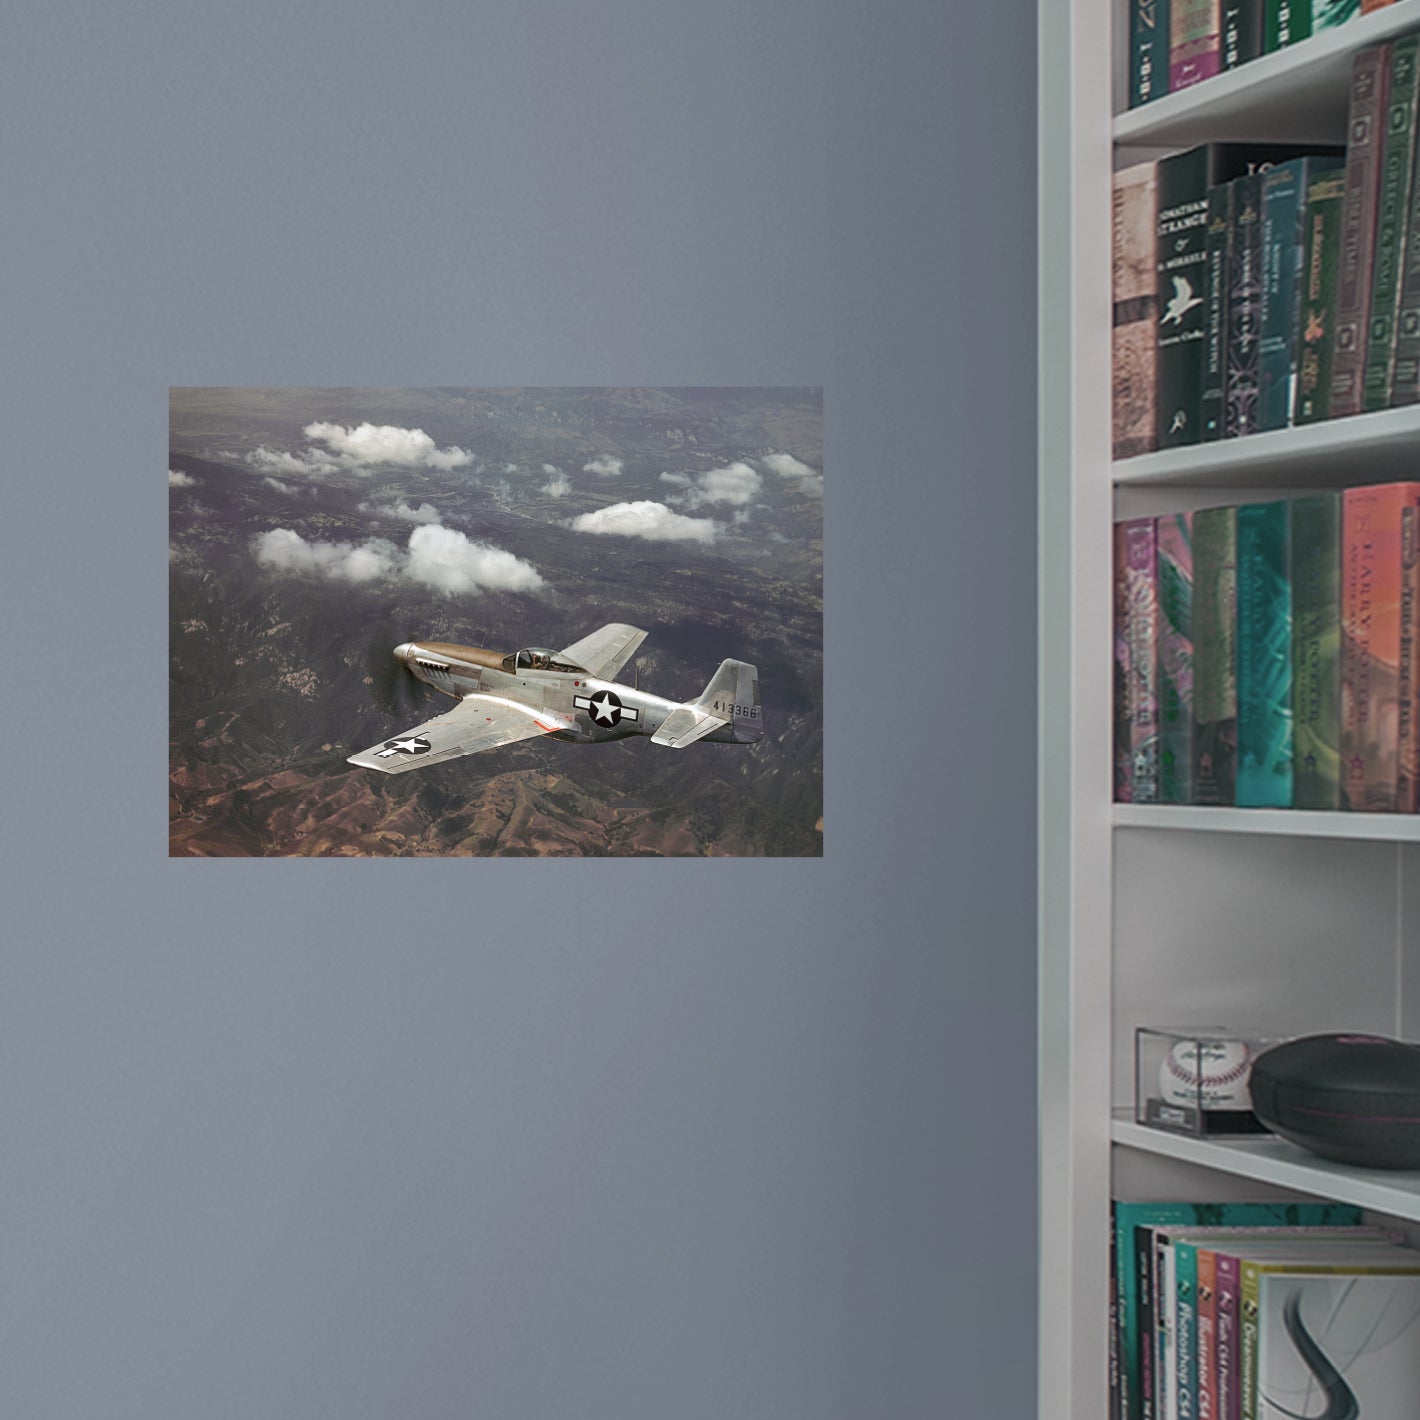 Boeing: Boeing 84-171i Poster - Officially Licensed Boeing Removable Adhesive Decal